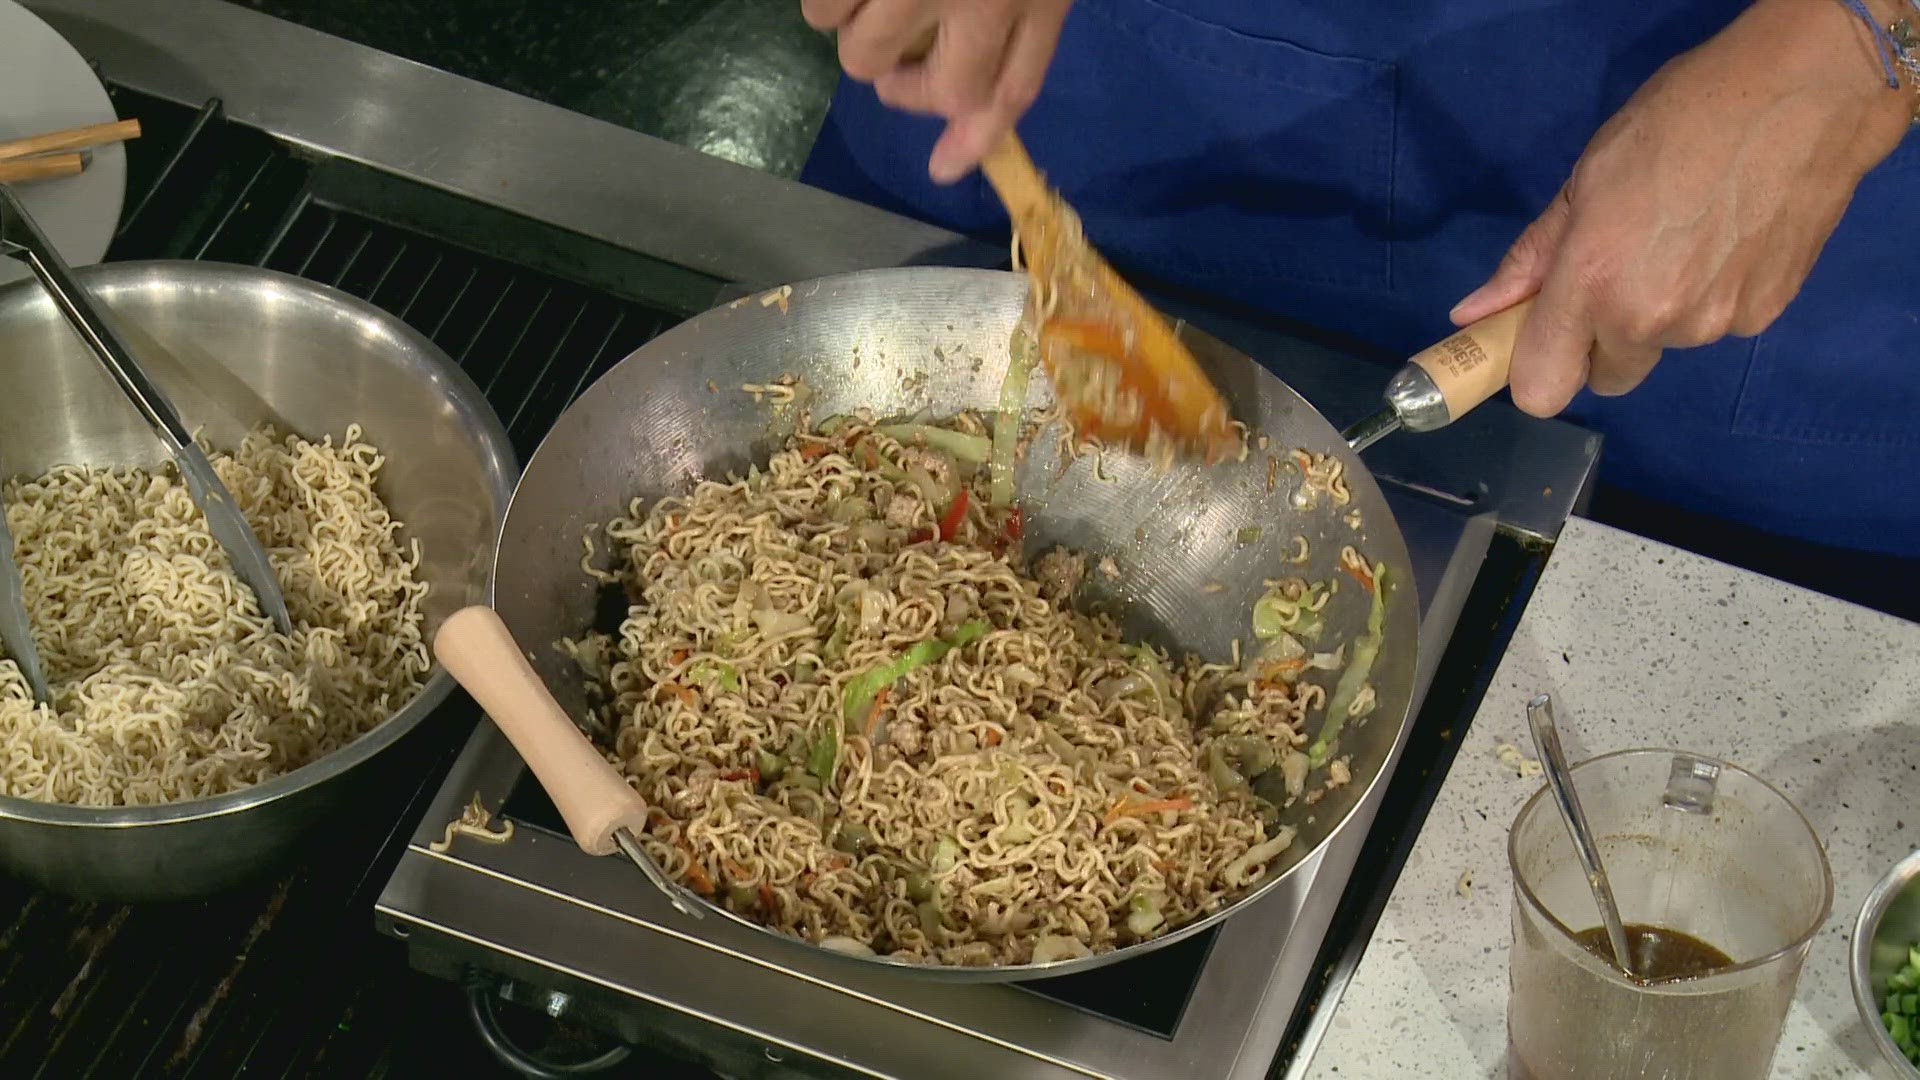 March is National Noodle Month, so Chef Kevin Belton is making egg roll inspired noodles and a savory kugel.